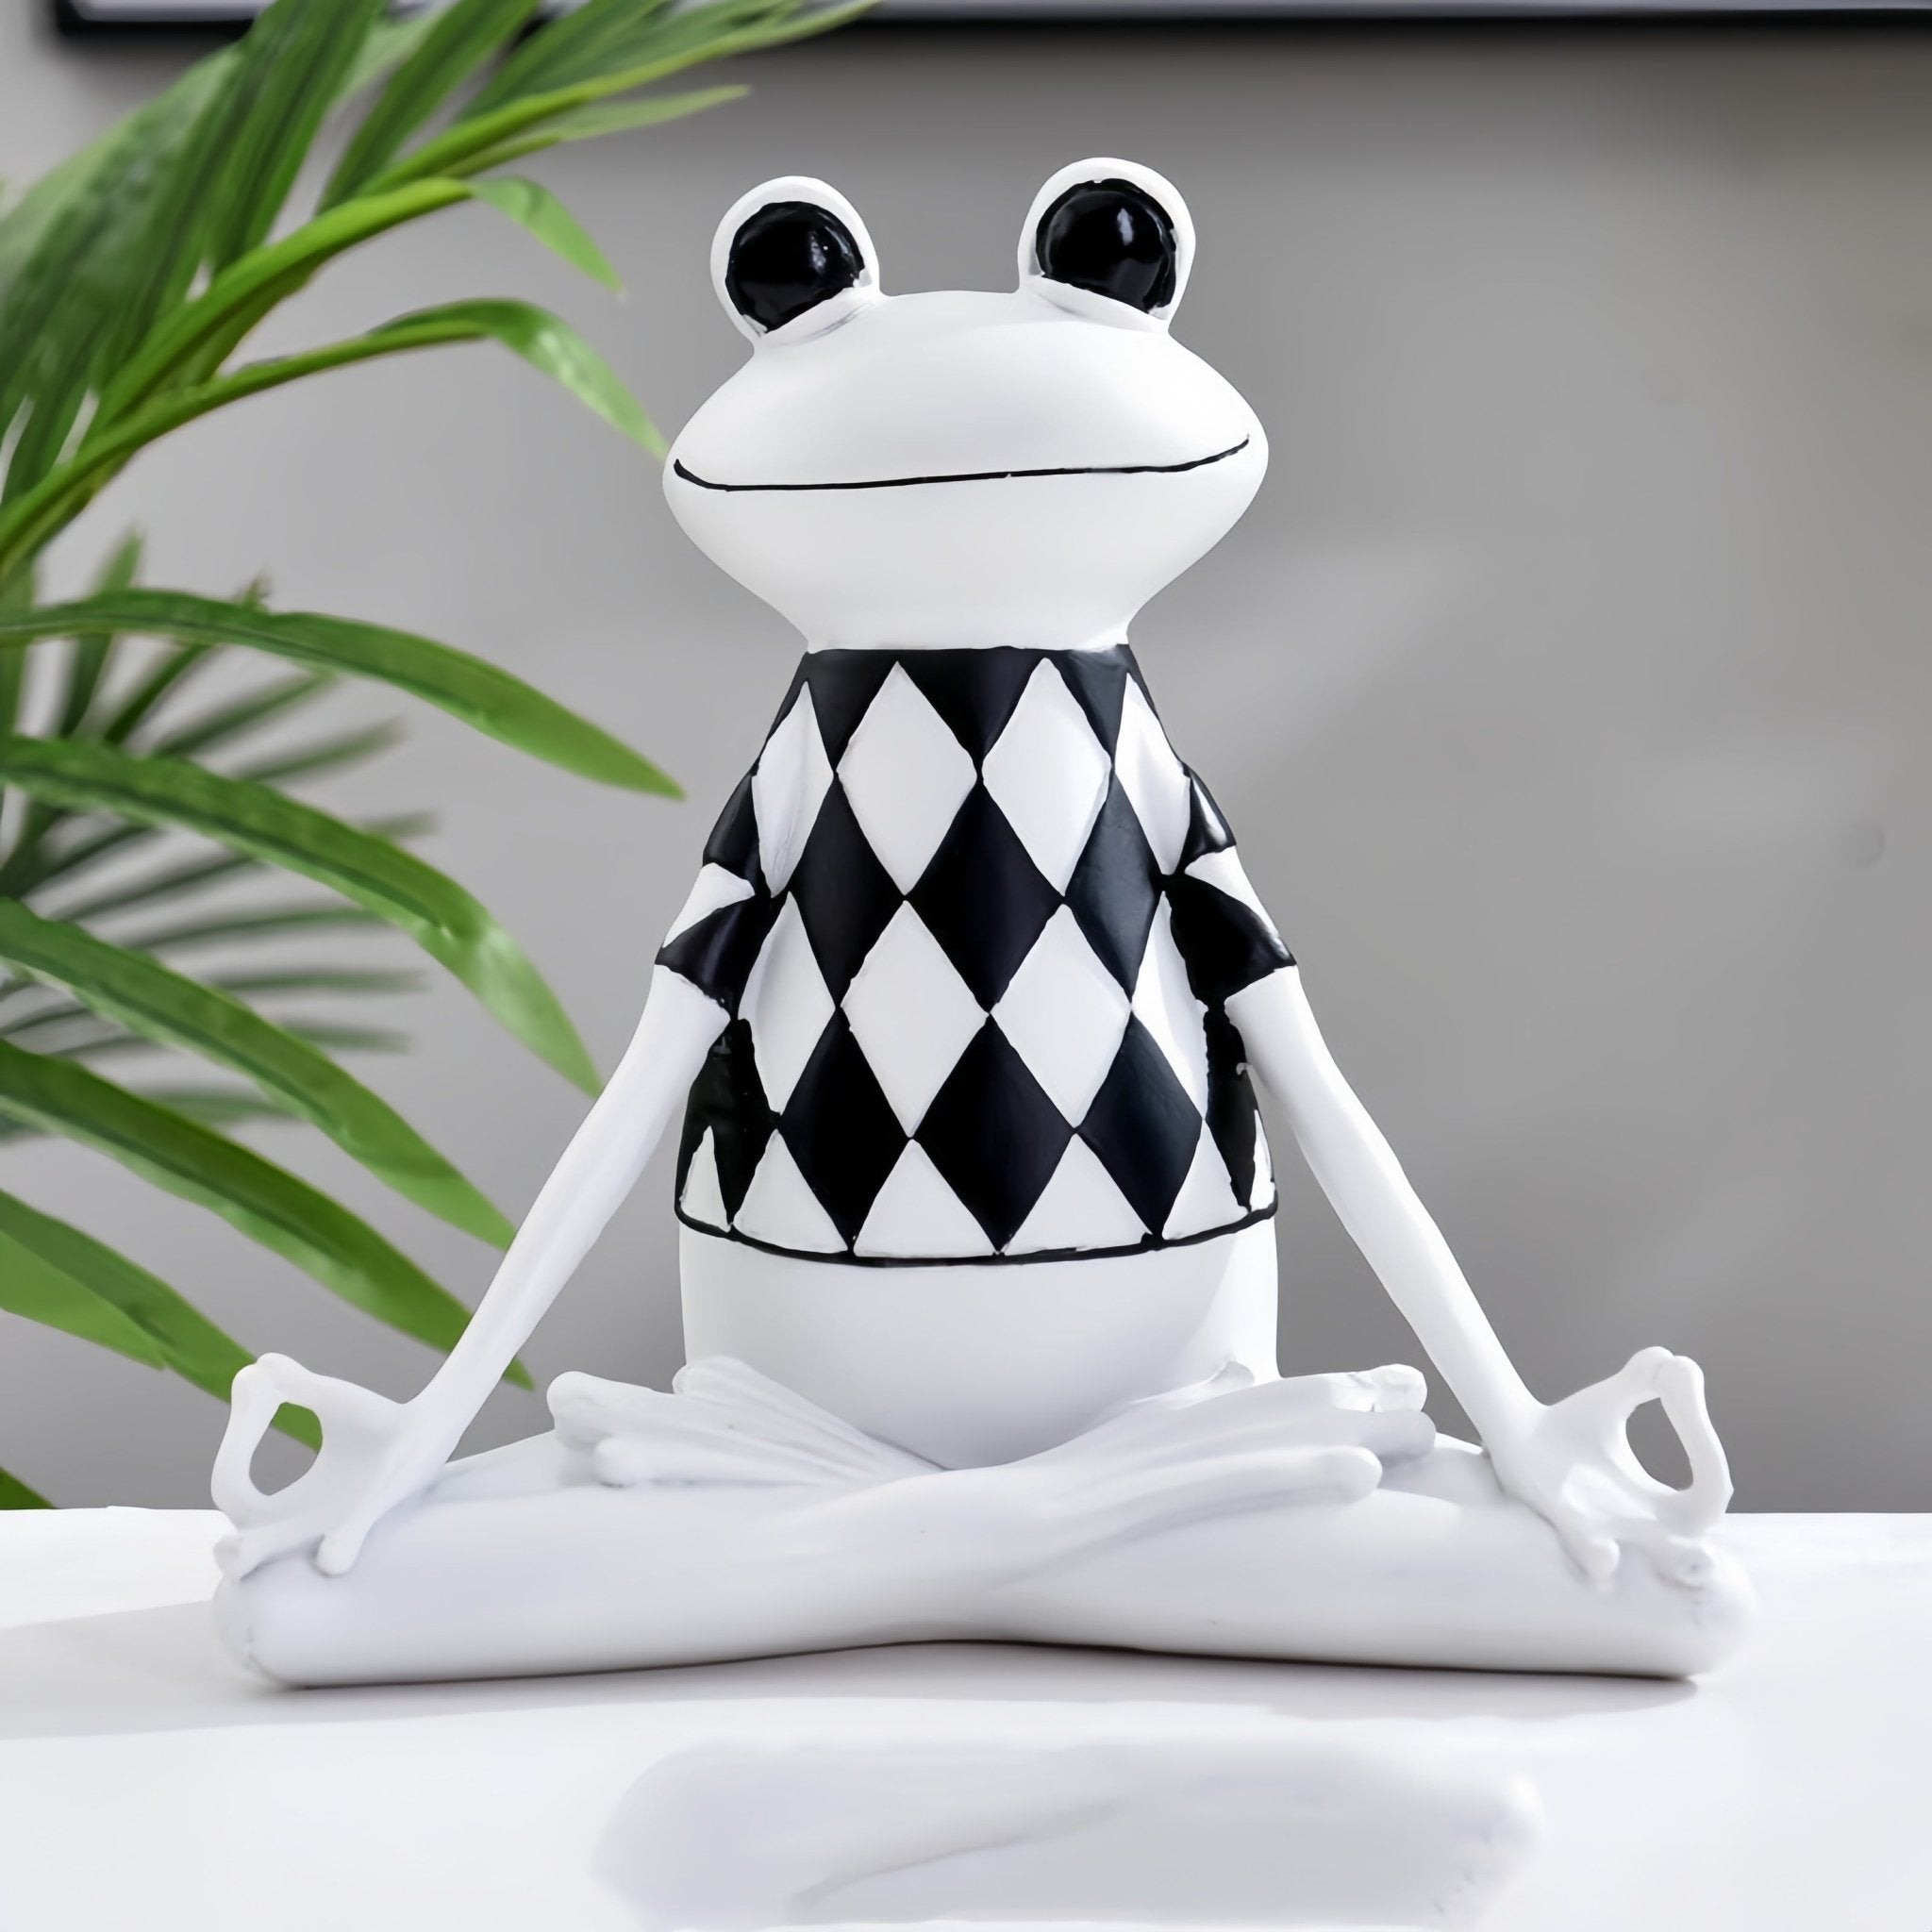 A Harmony Zen Frog Statue displayed in a sitting pose against a minimalistic white background.